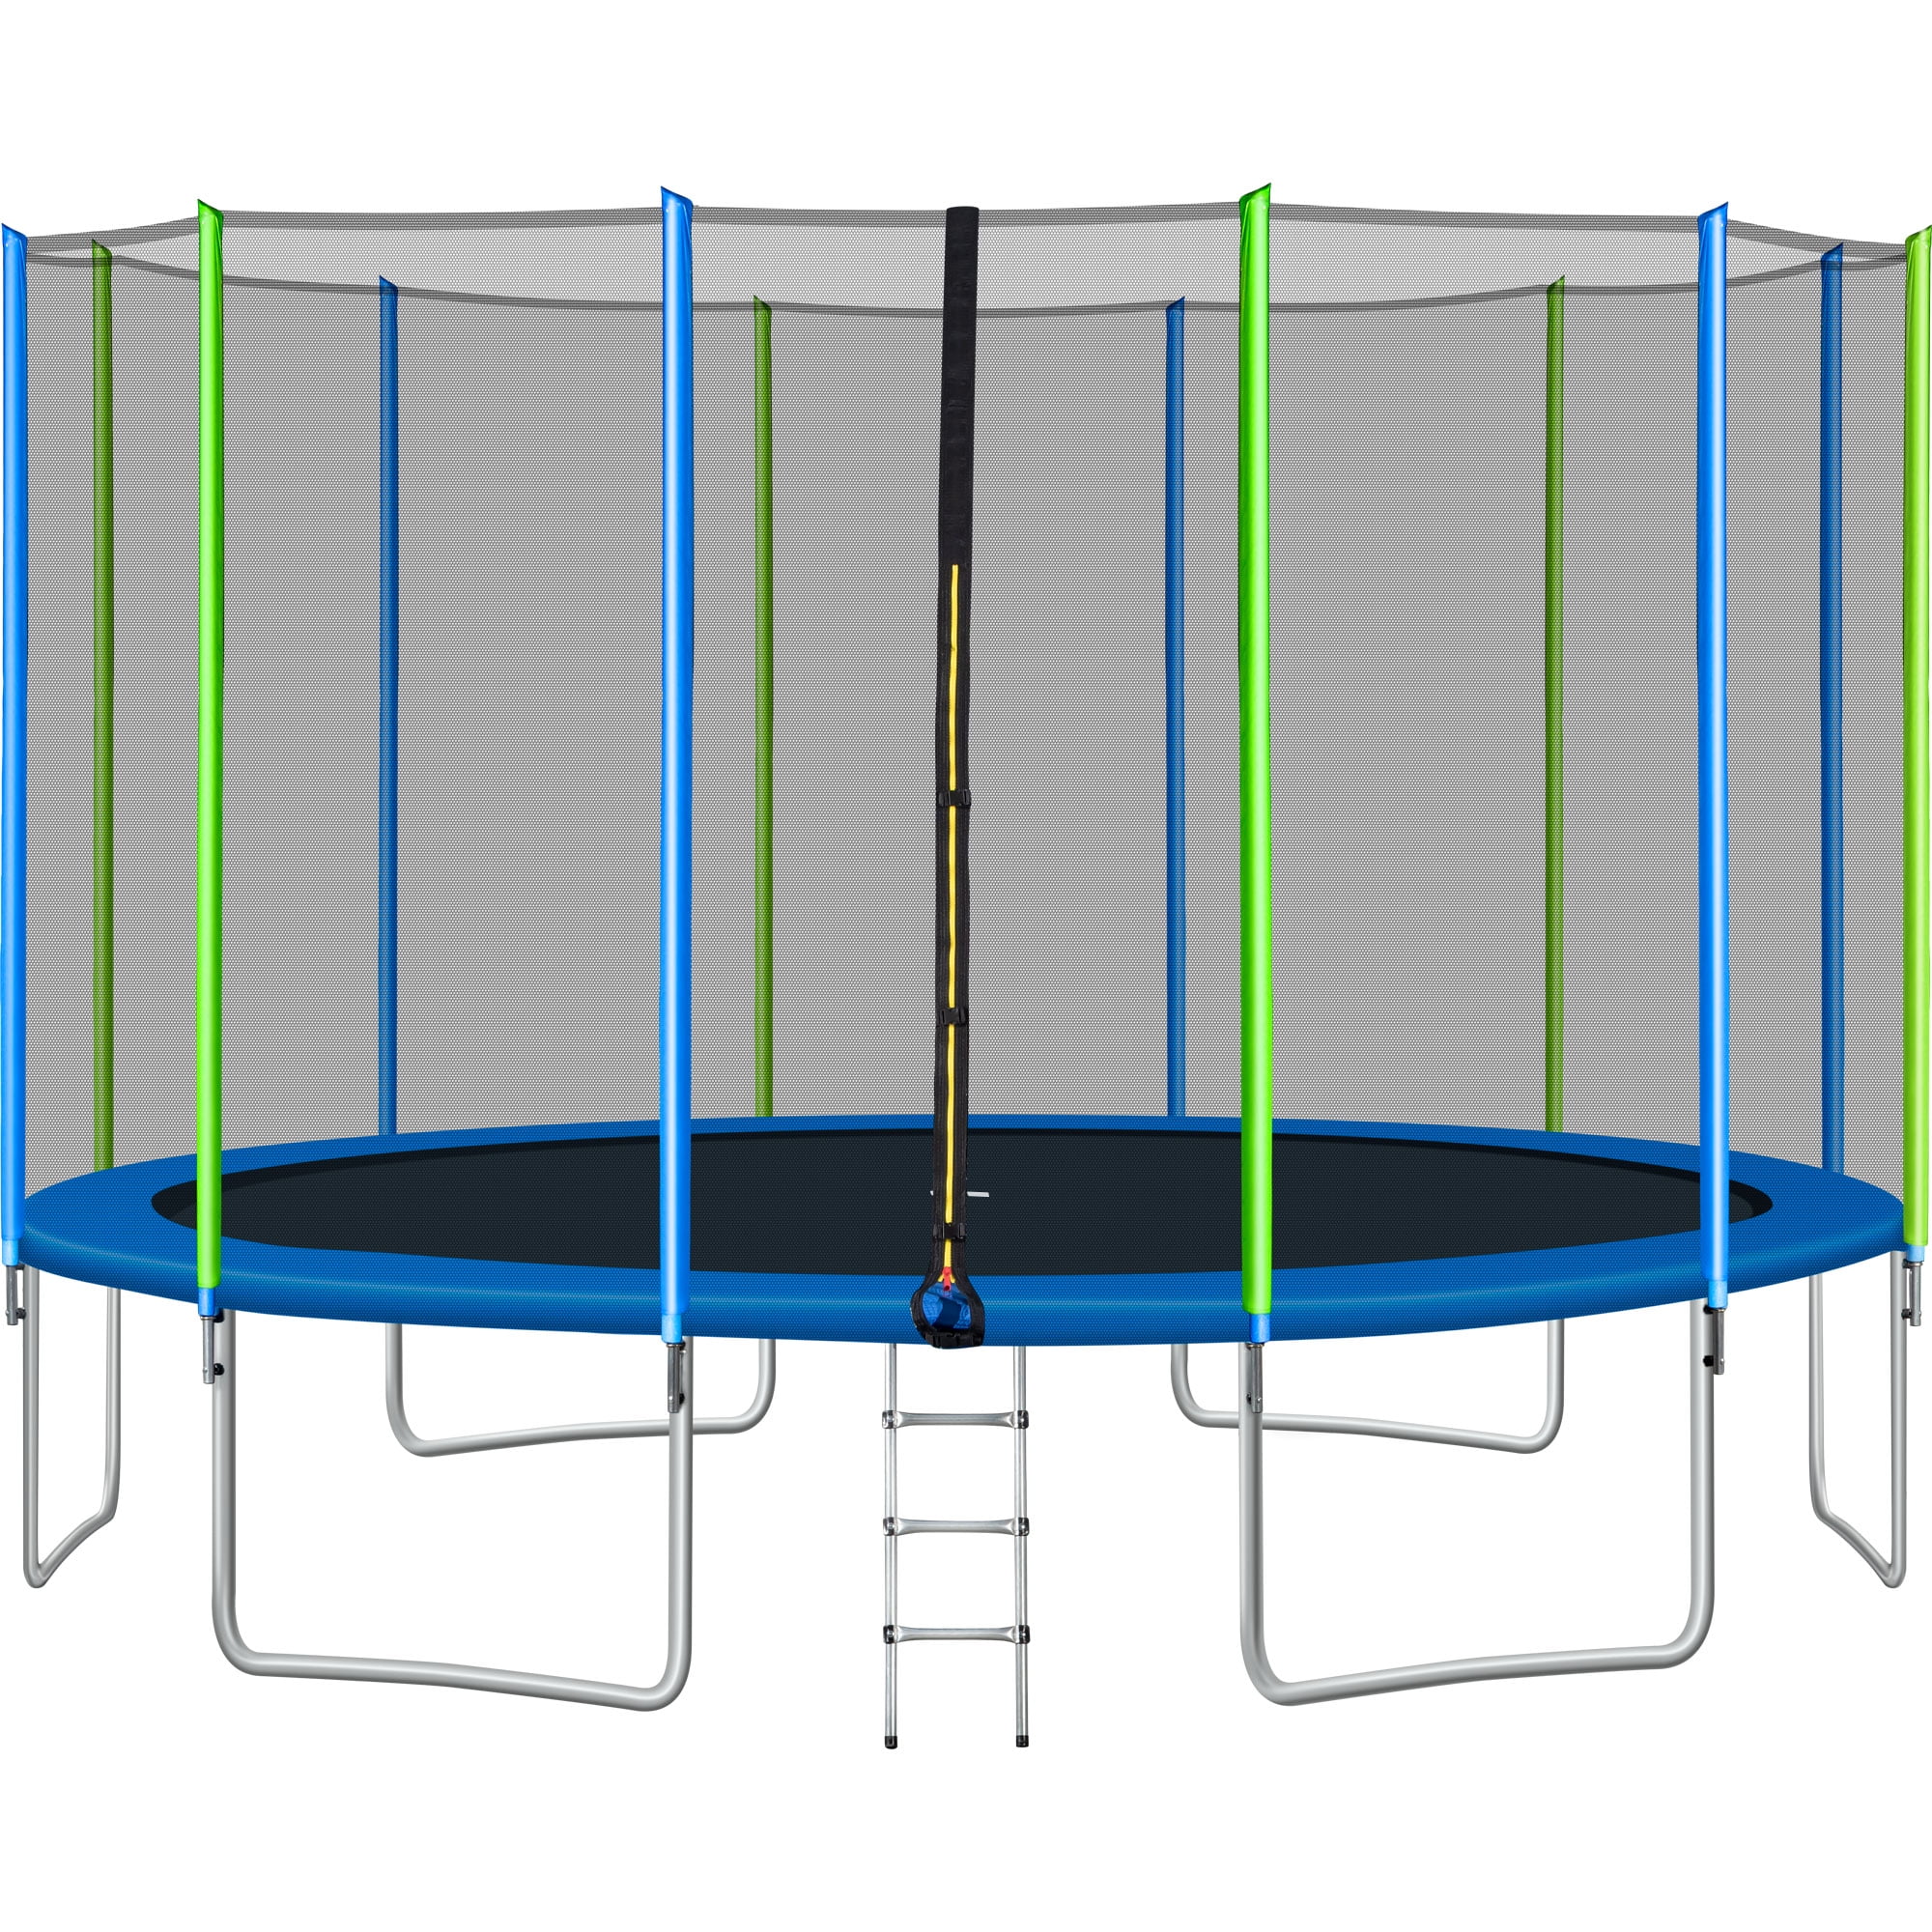 GoolRC 16FT Trampoline for Kids with Safety Enclosure Net, Ladder and 12 Wind Stakes, Round Outdoor Recreational Trampoline